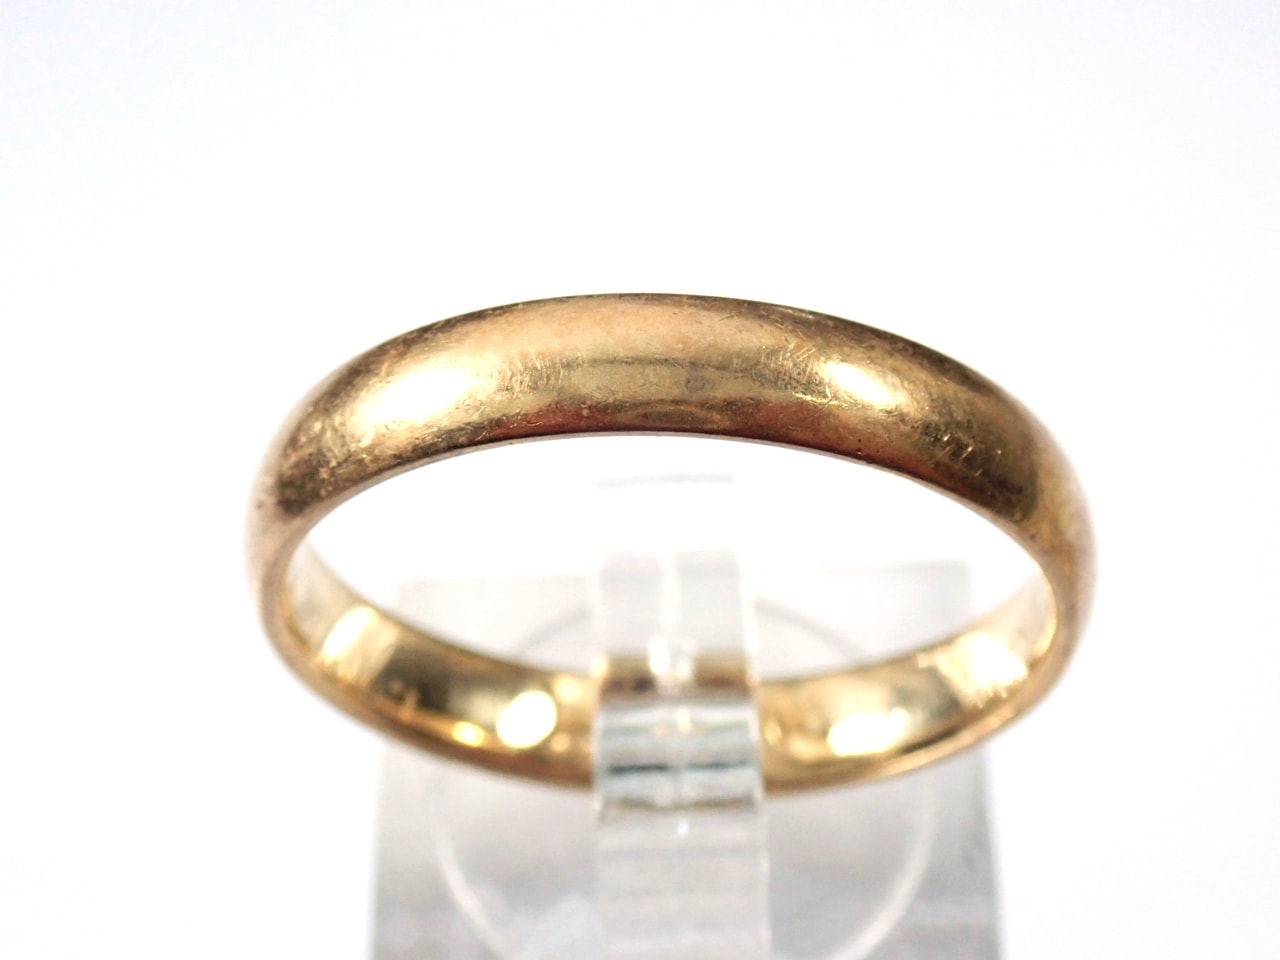 9ct Gold Wedding Band Ring Size W 3.9 grams